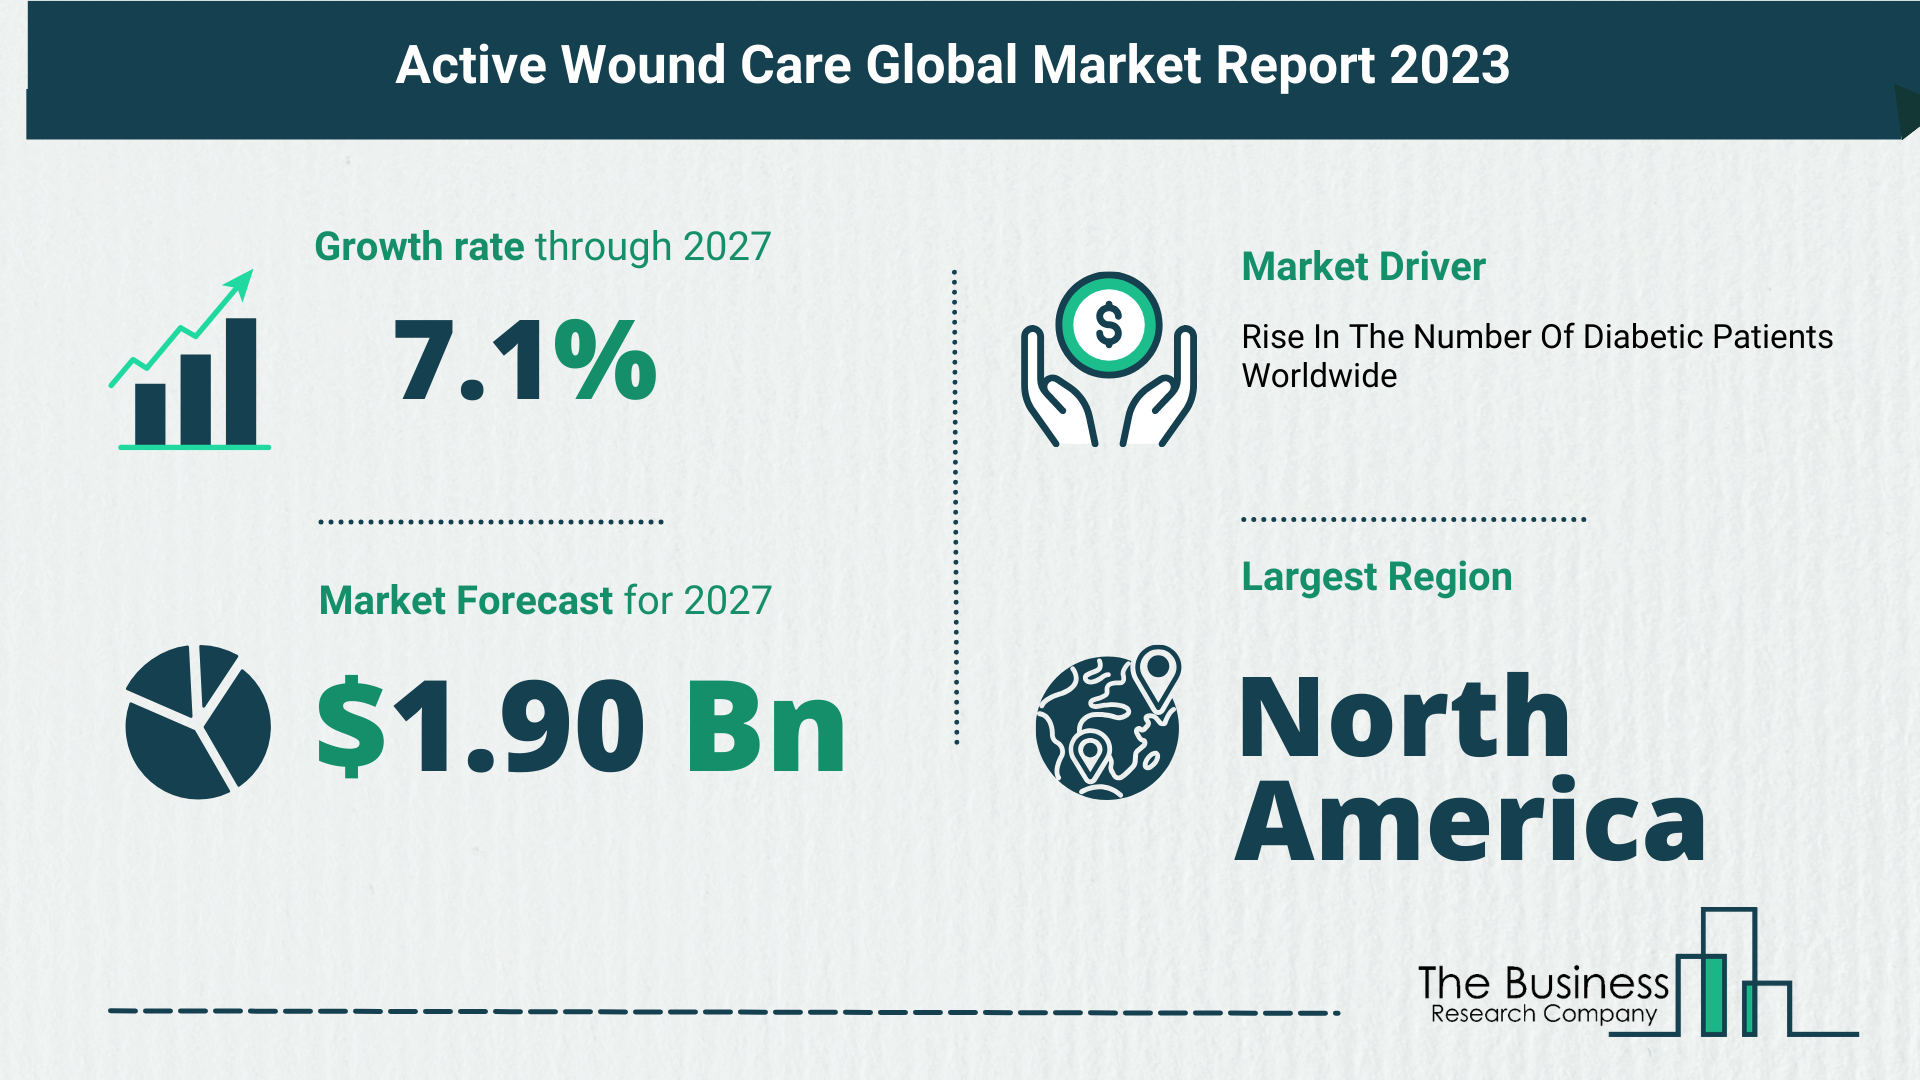 Key Trends And Drivers In The Active Wound Care Market 2023